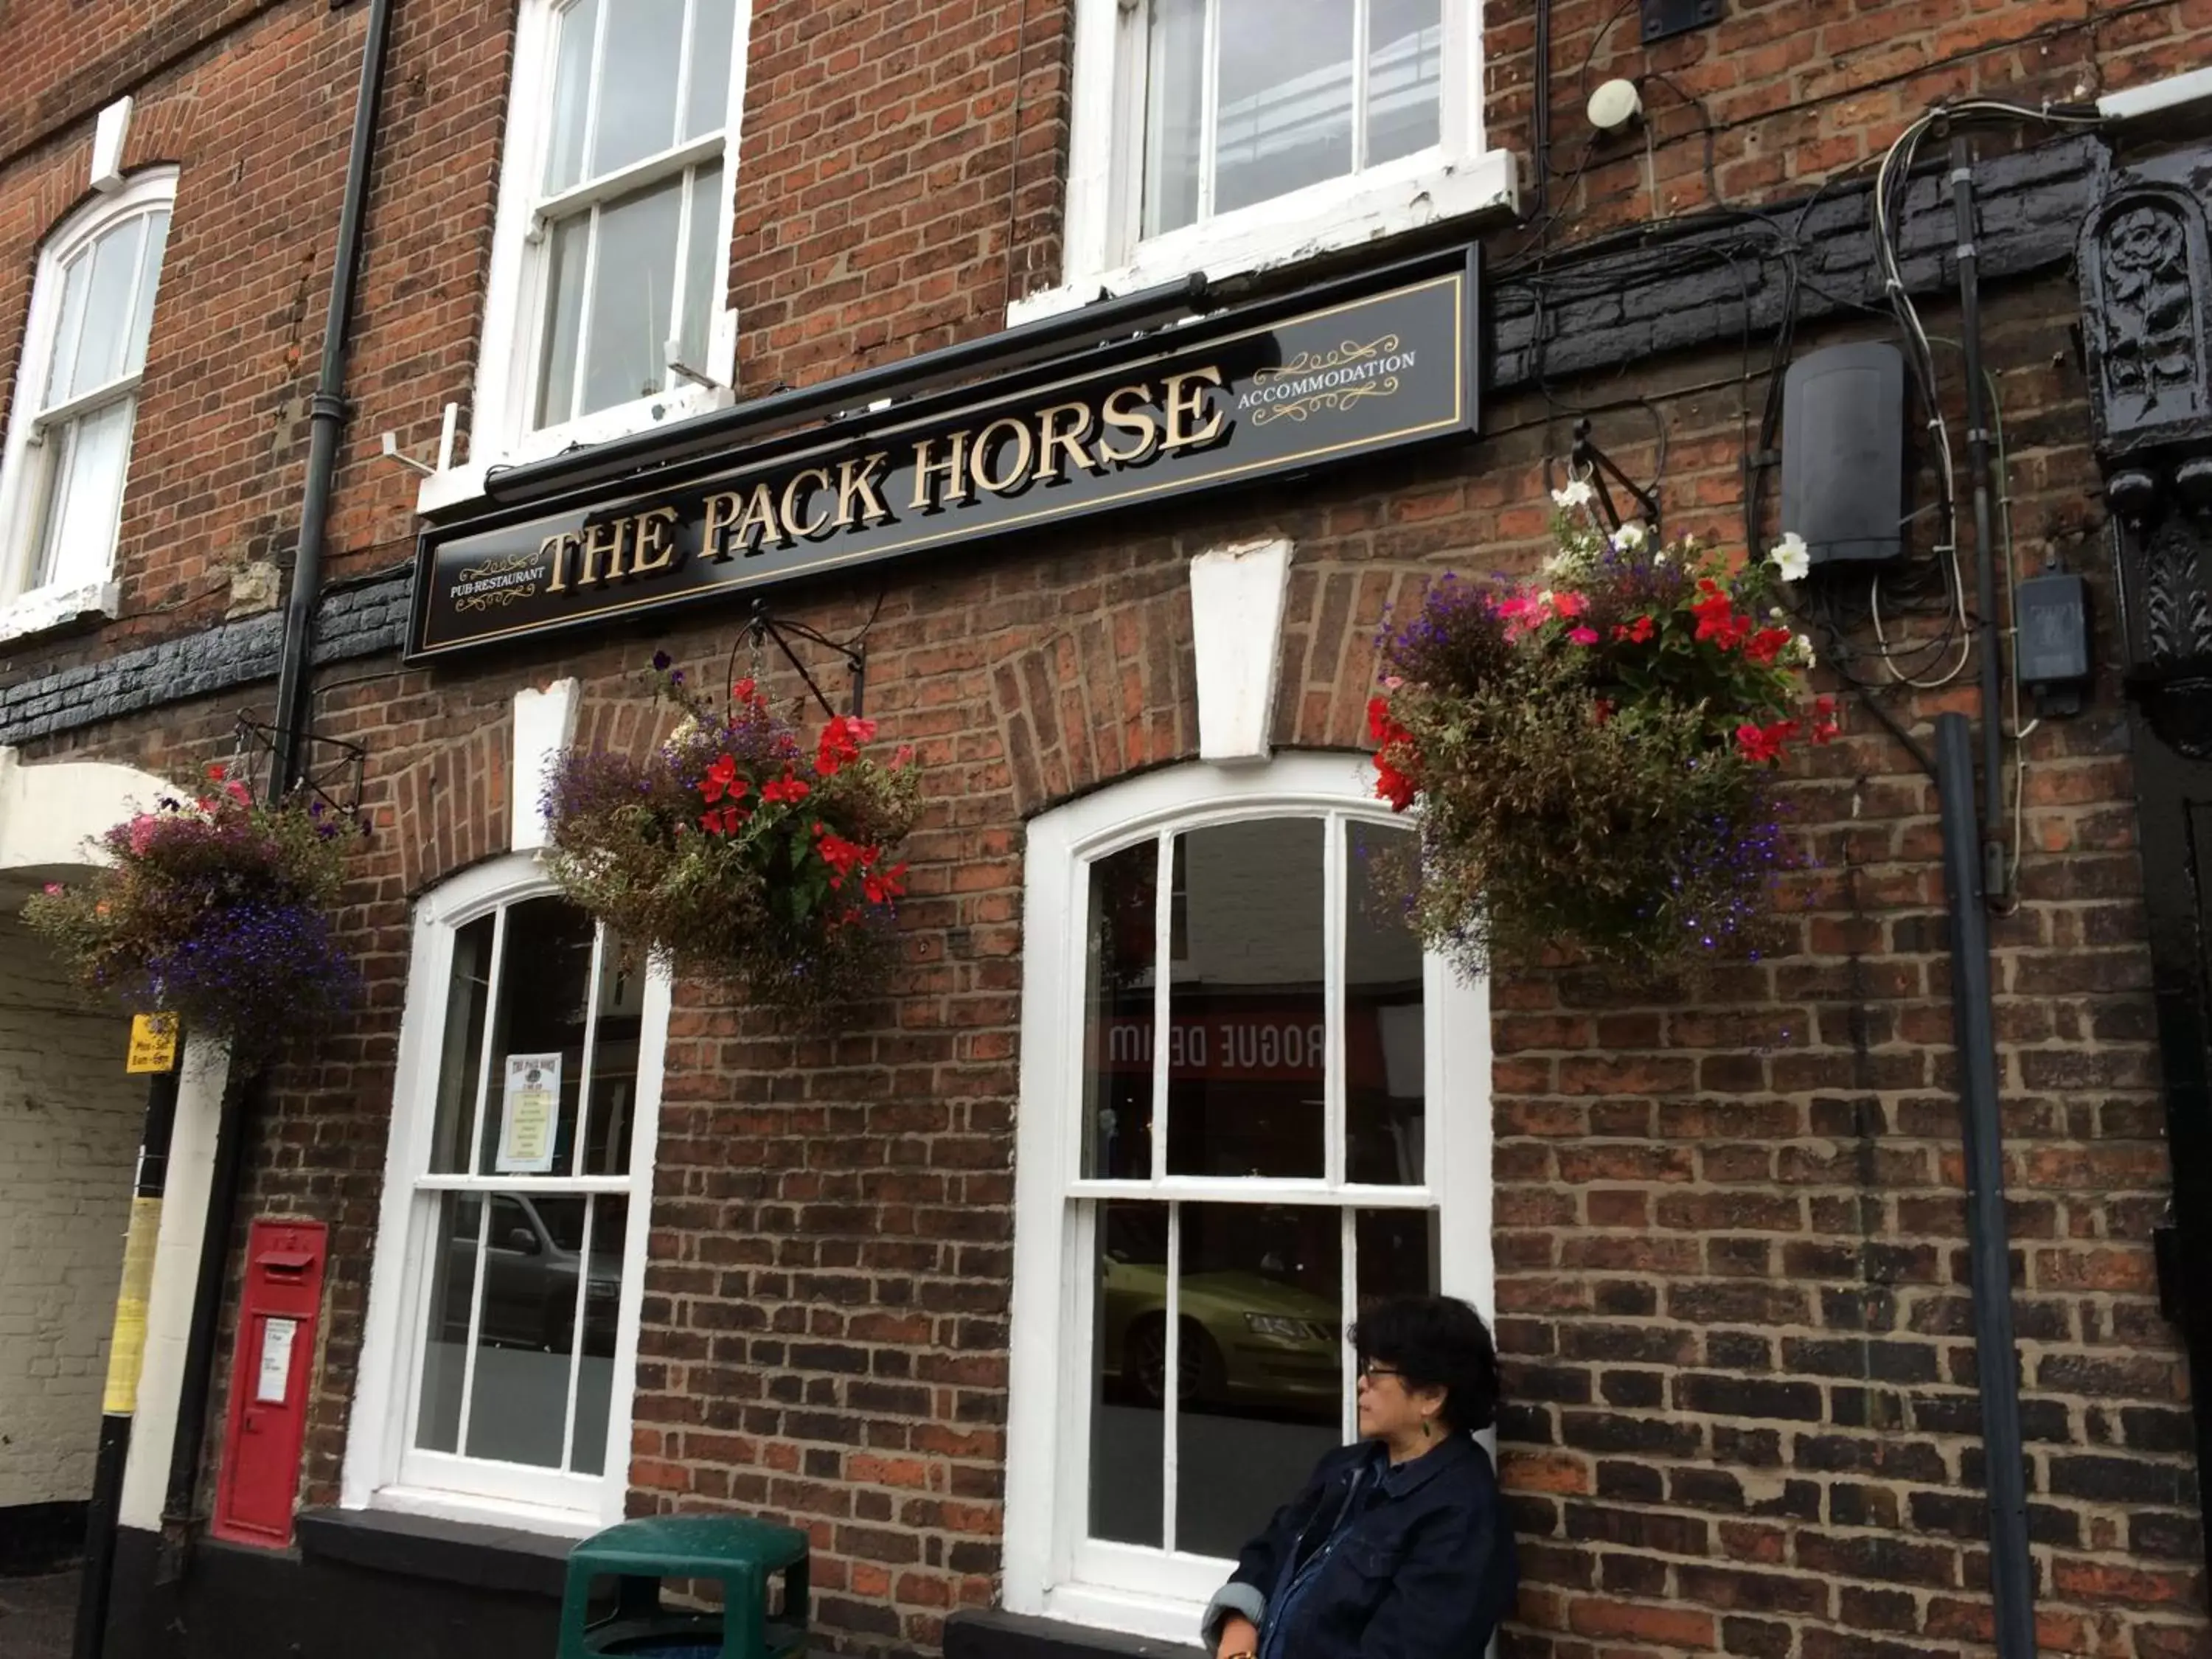 Facade/entrance in The Pack Horse